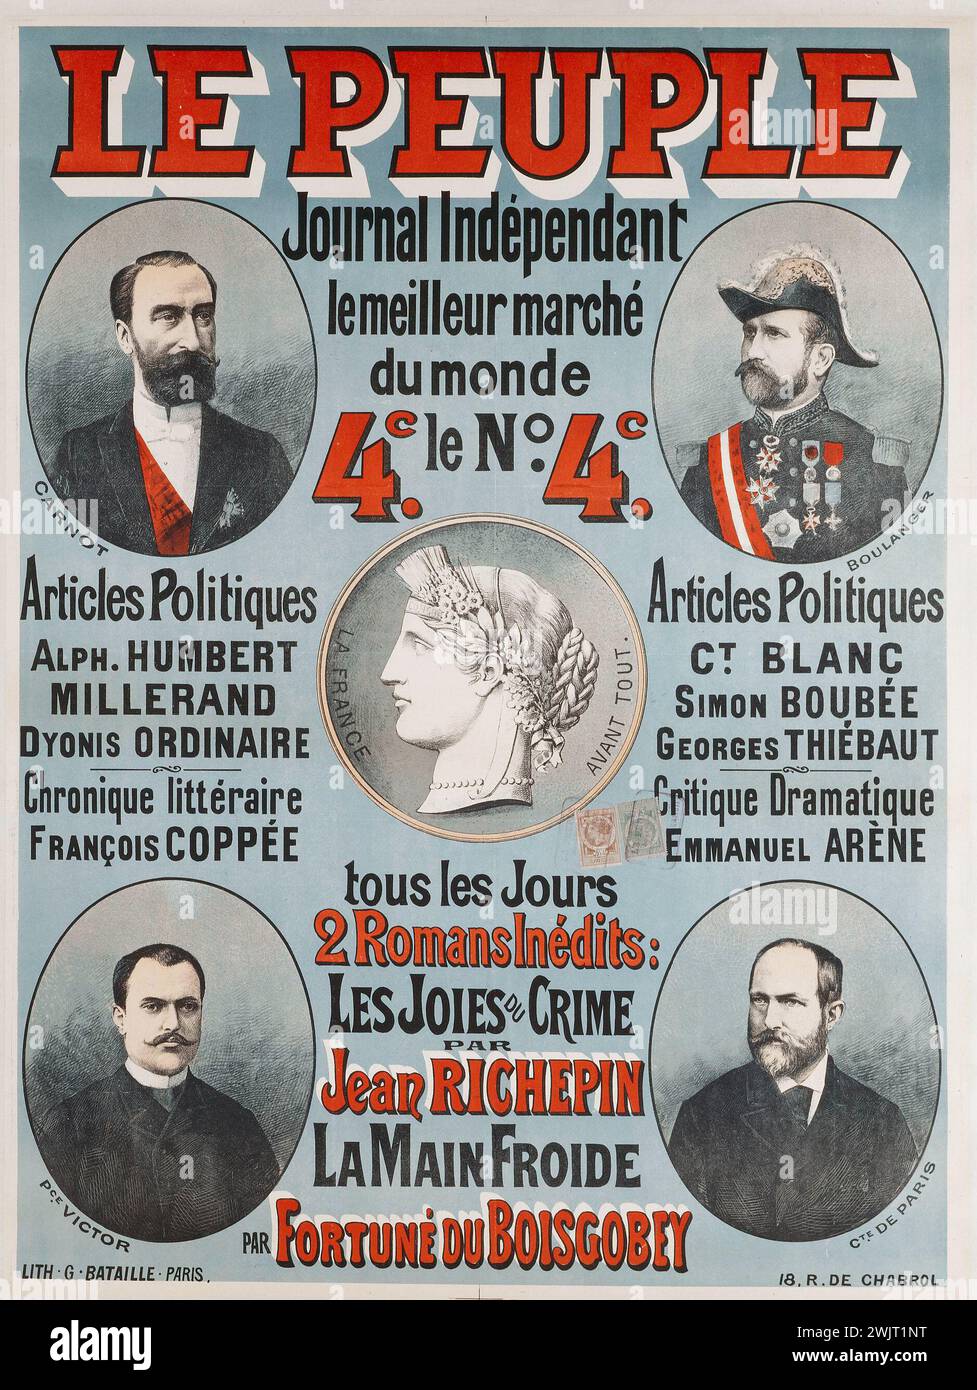 Imprimerie G. Bataille. The people, independent newspaper. Poster. Color lithography. Paris, Carnavalet museum. Advertising poster, independent, independent newspaper, political newspaper, people, color lithography, advertising Stock Photo